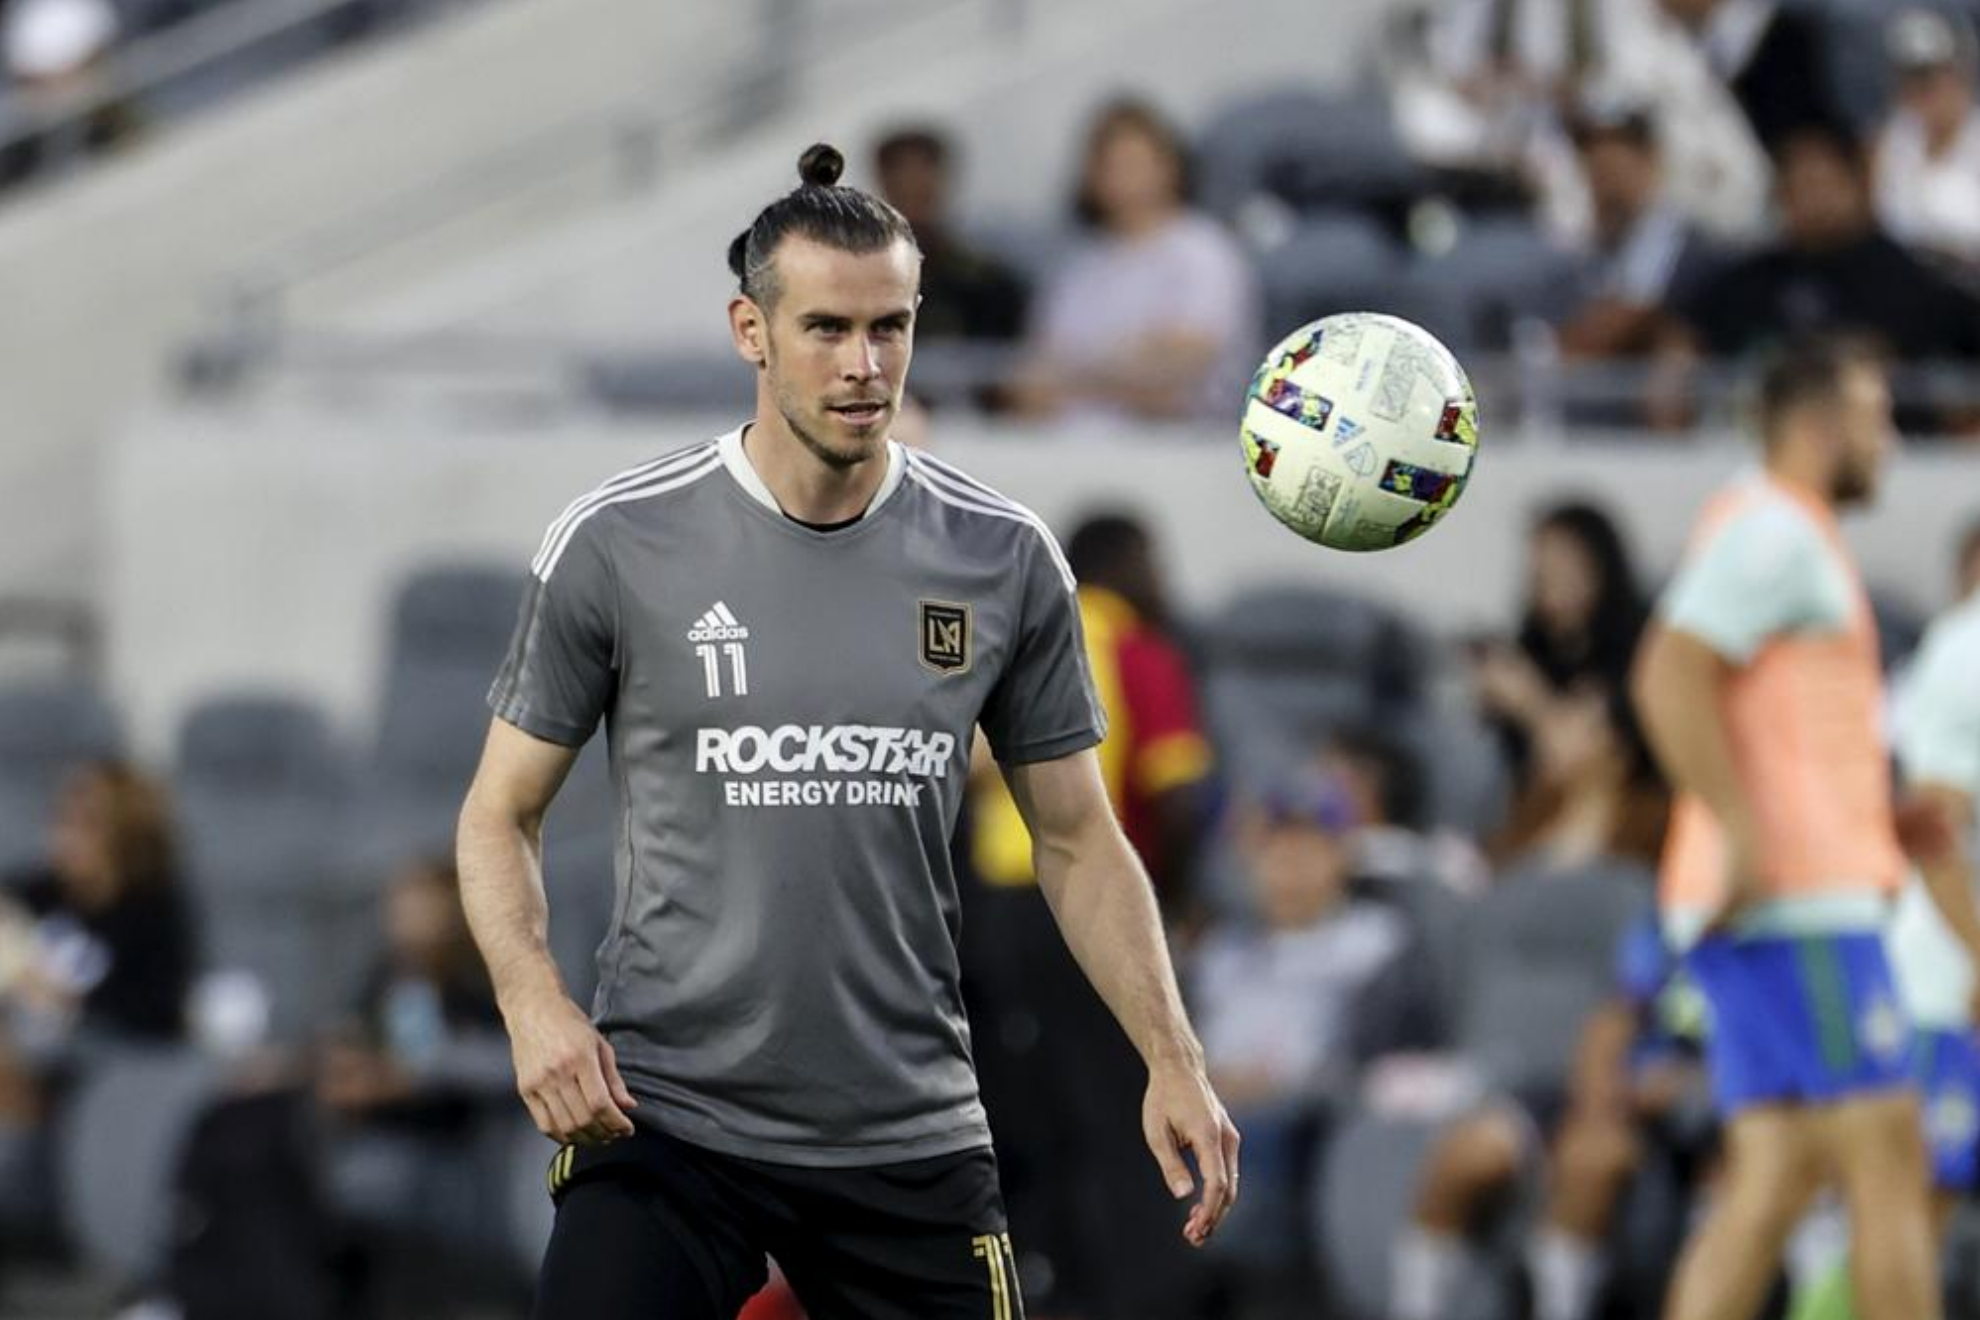 Gareth Bale isn't playing with LAFC and many are worried he won't get to  the World Cup in peak form